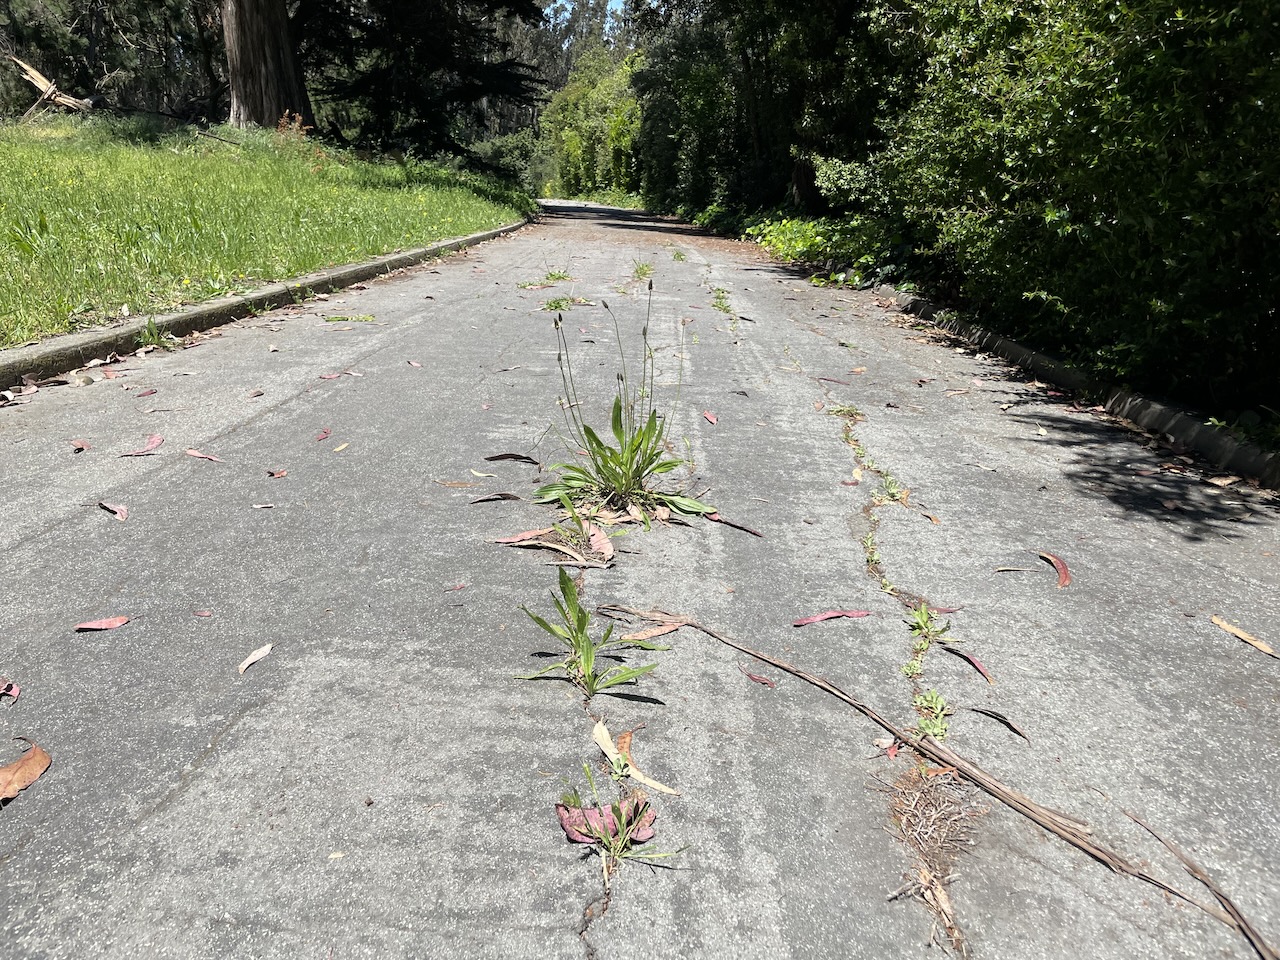 Plantain grows from cracks in the middle of an overgrown asphalt road